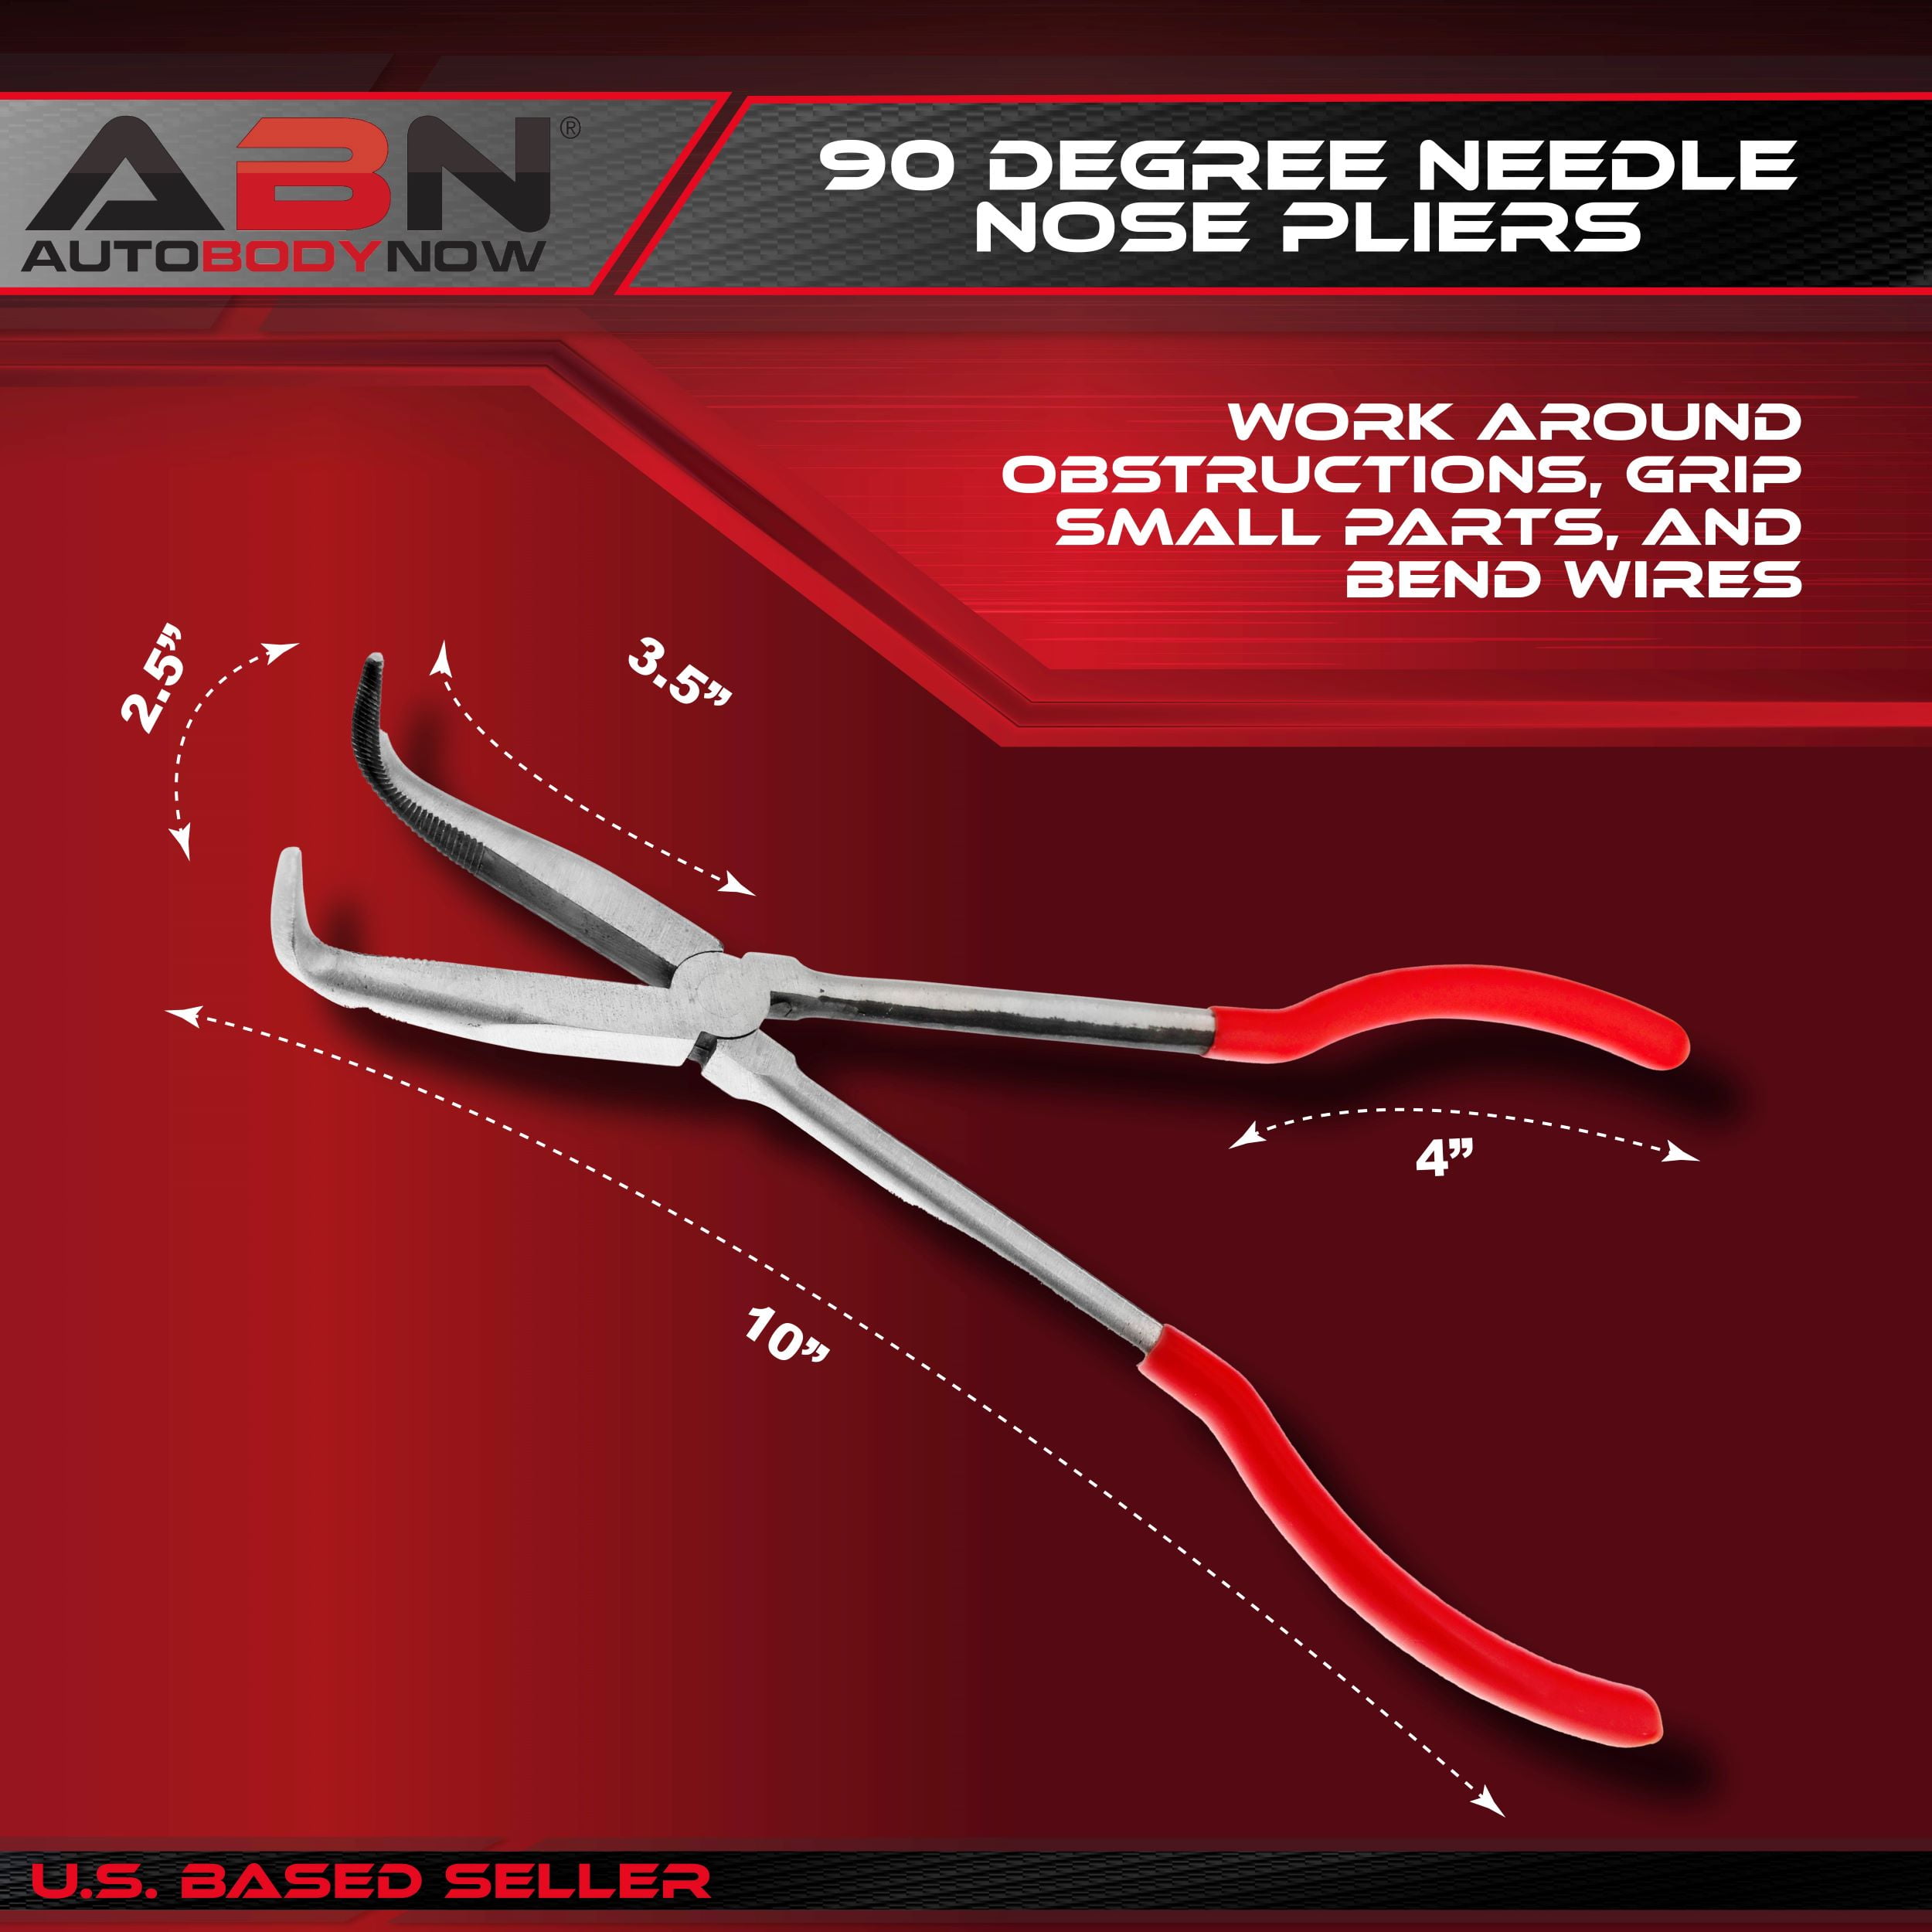 16 EXTRA LONG BENT NEEDLE NOSE PLIERS, PLBN90-16